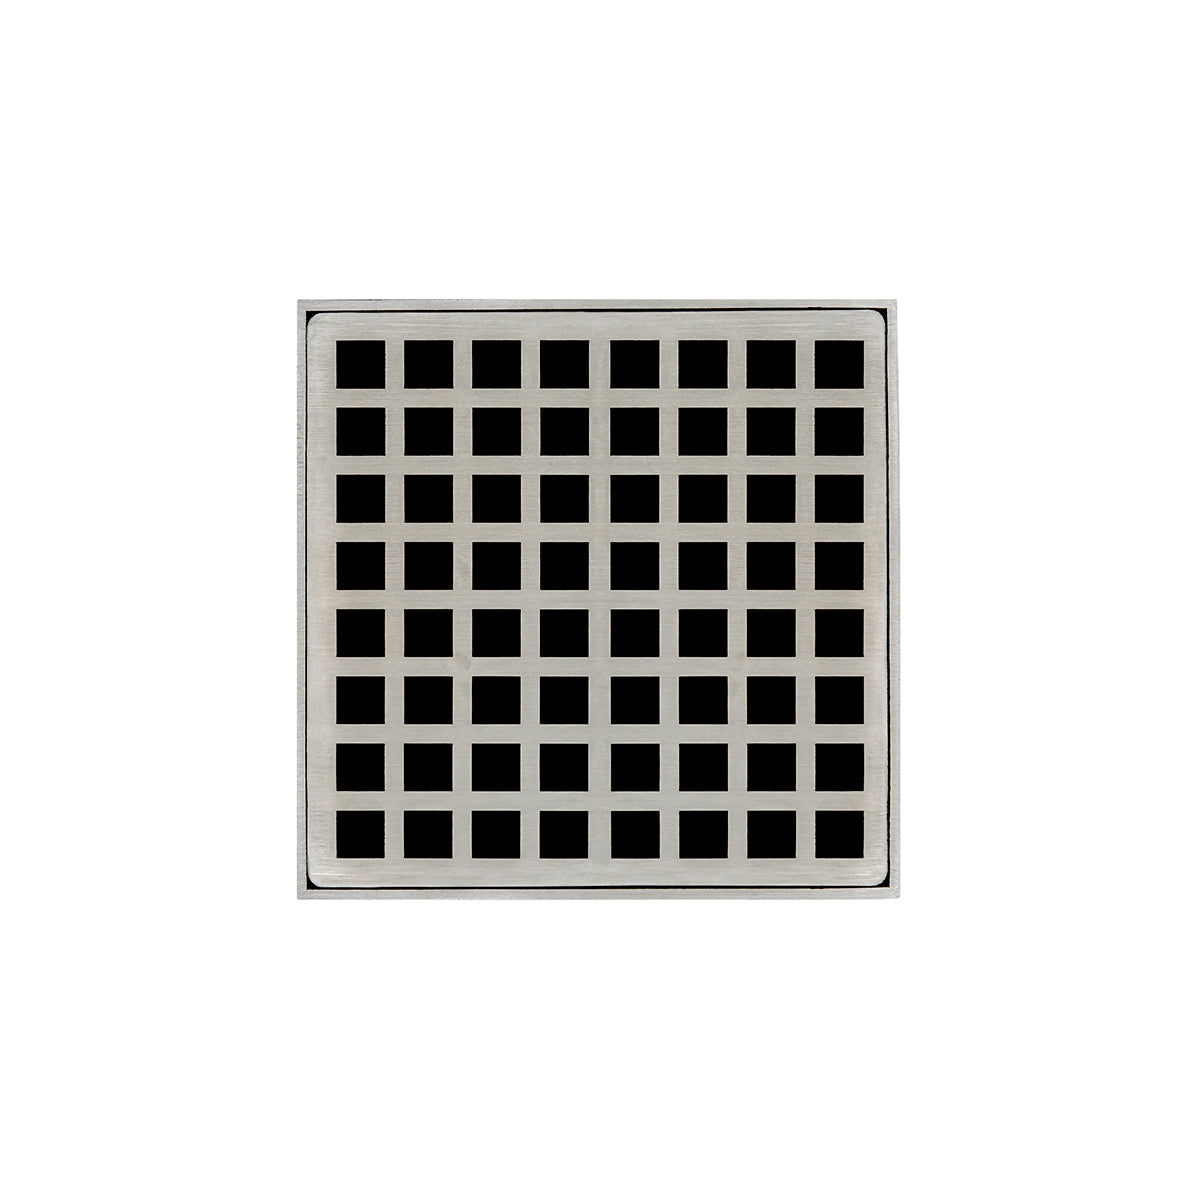 Infinity Drain 5" x 5" QD 5 Premium Center Drain Kit with Squares Pattern Decorative Plate with Cast Iron Drain Body for Hot Mop, 2" Outlet